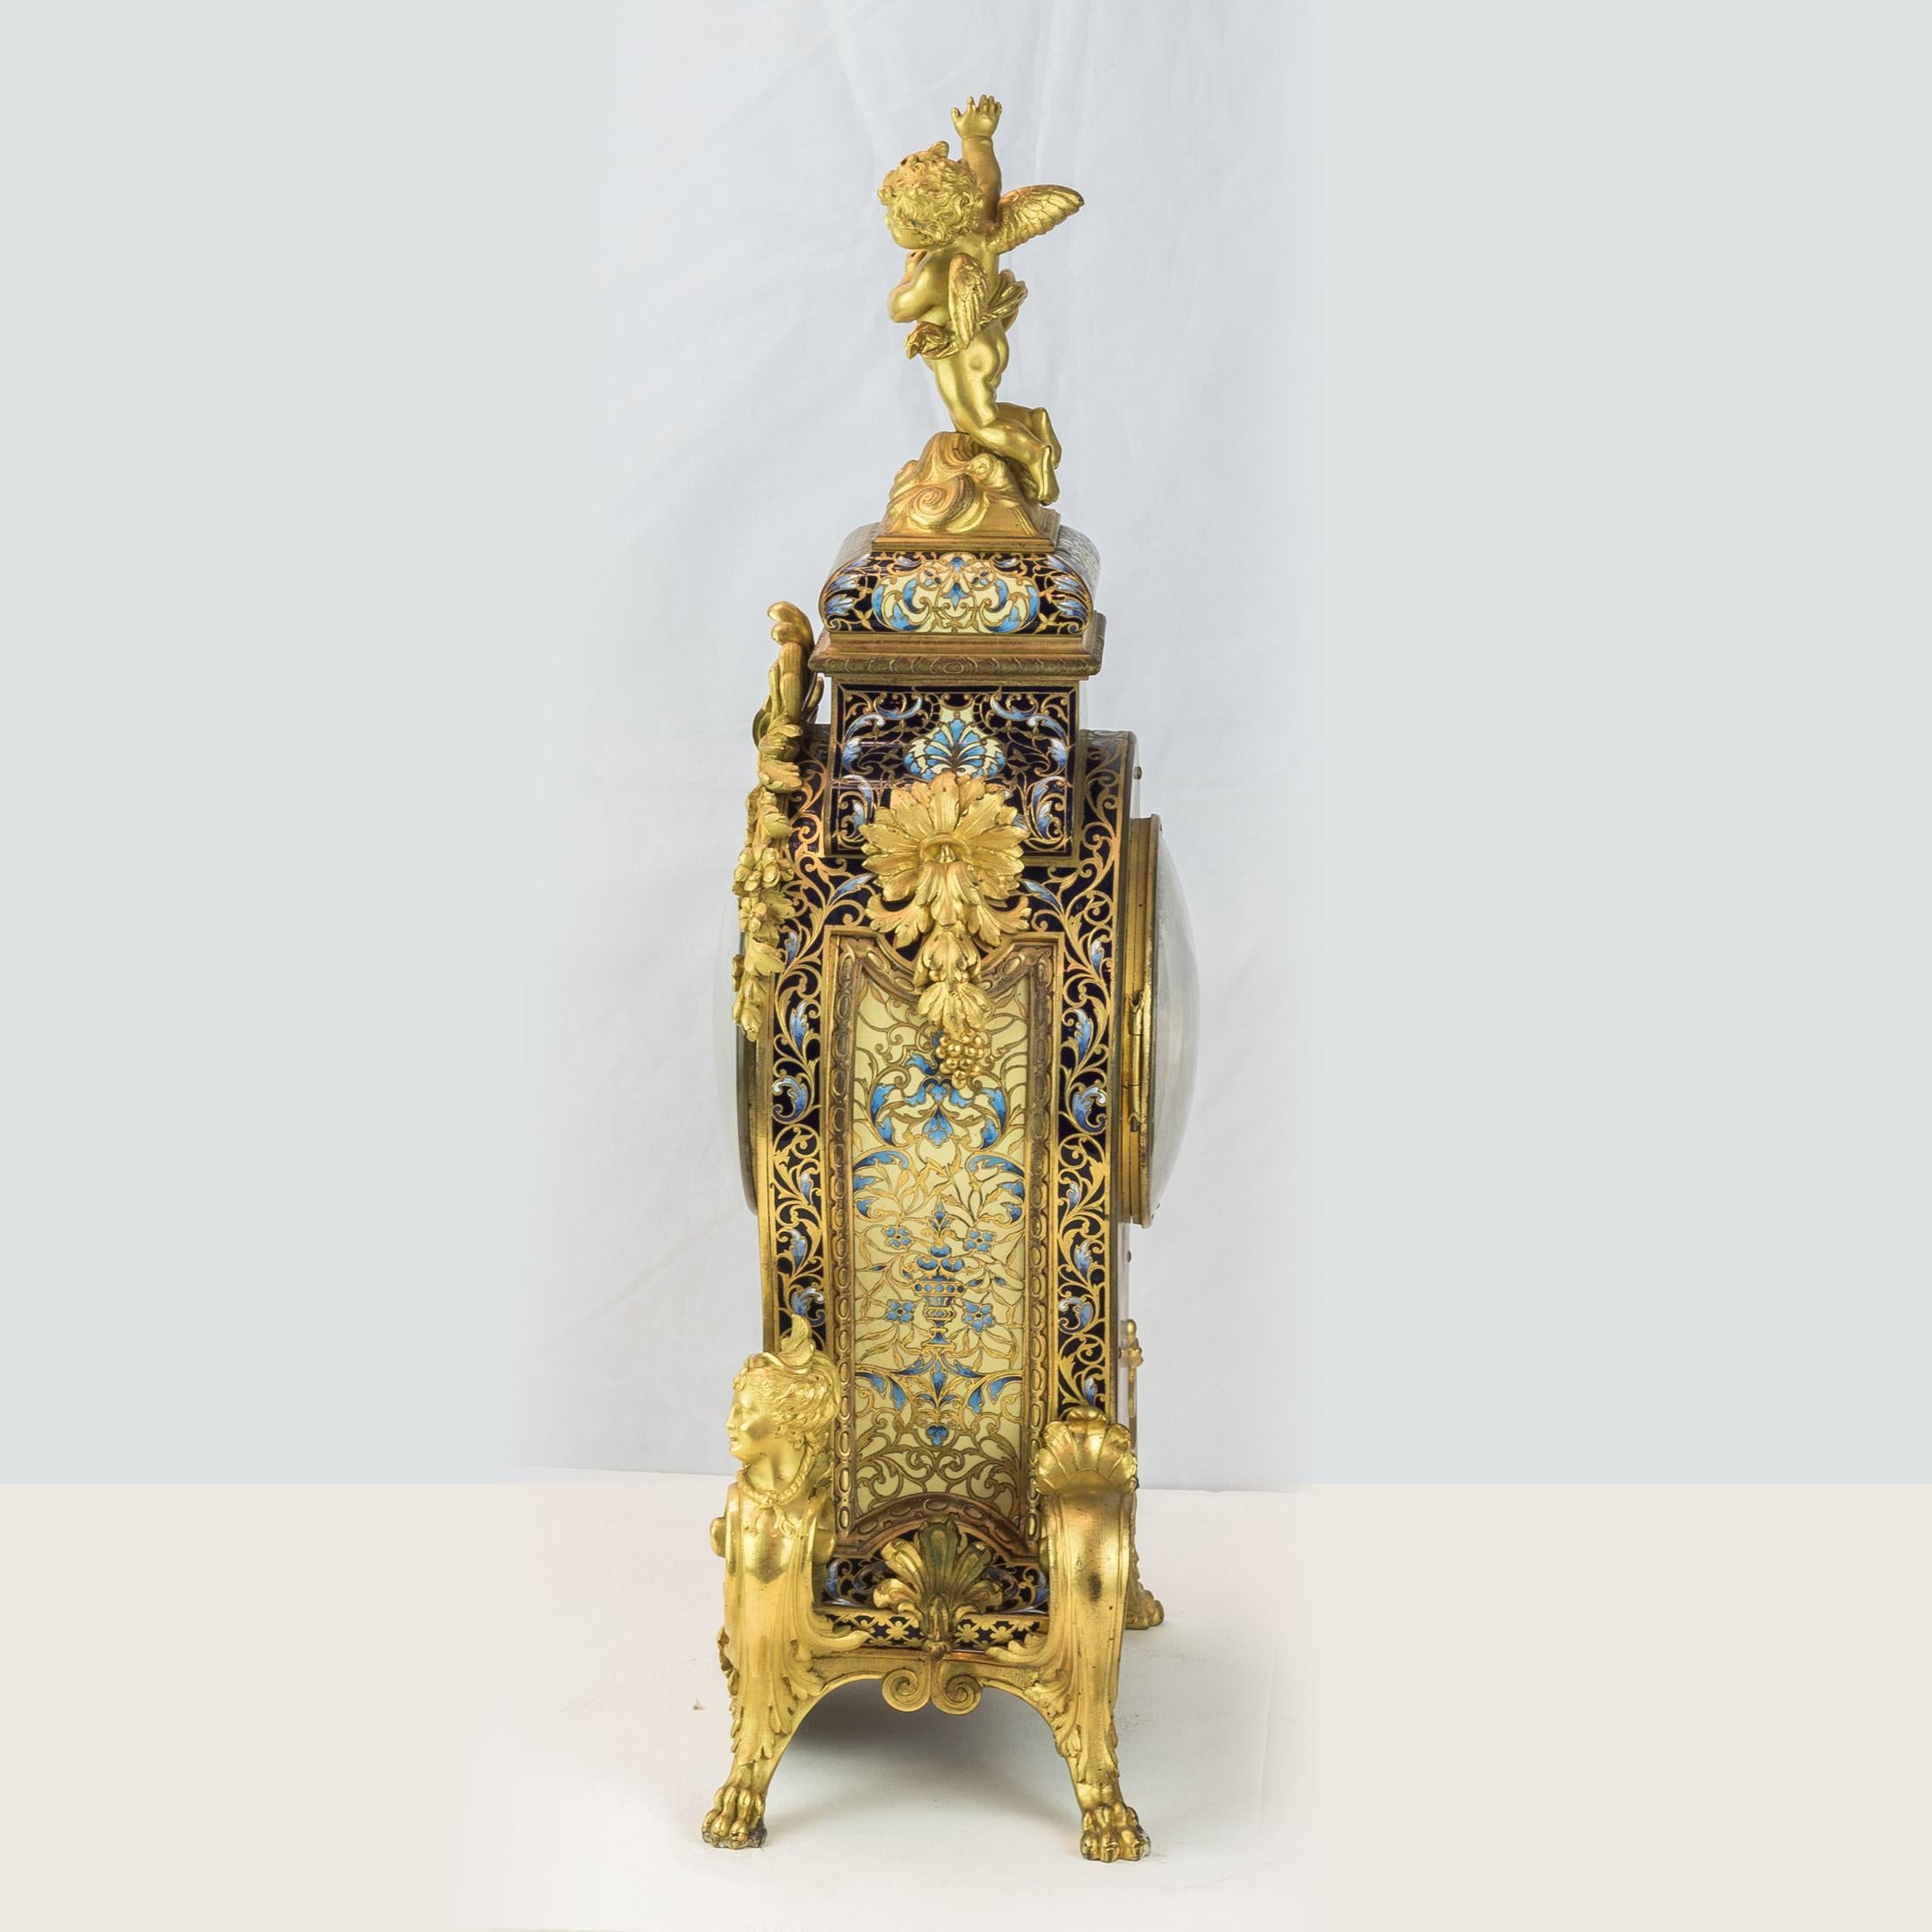 19th Century French Champlevé and Ormolu Figural Mantle Clock